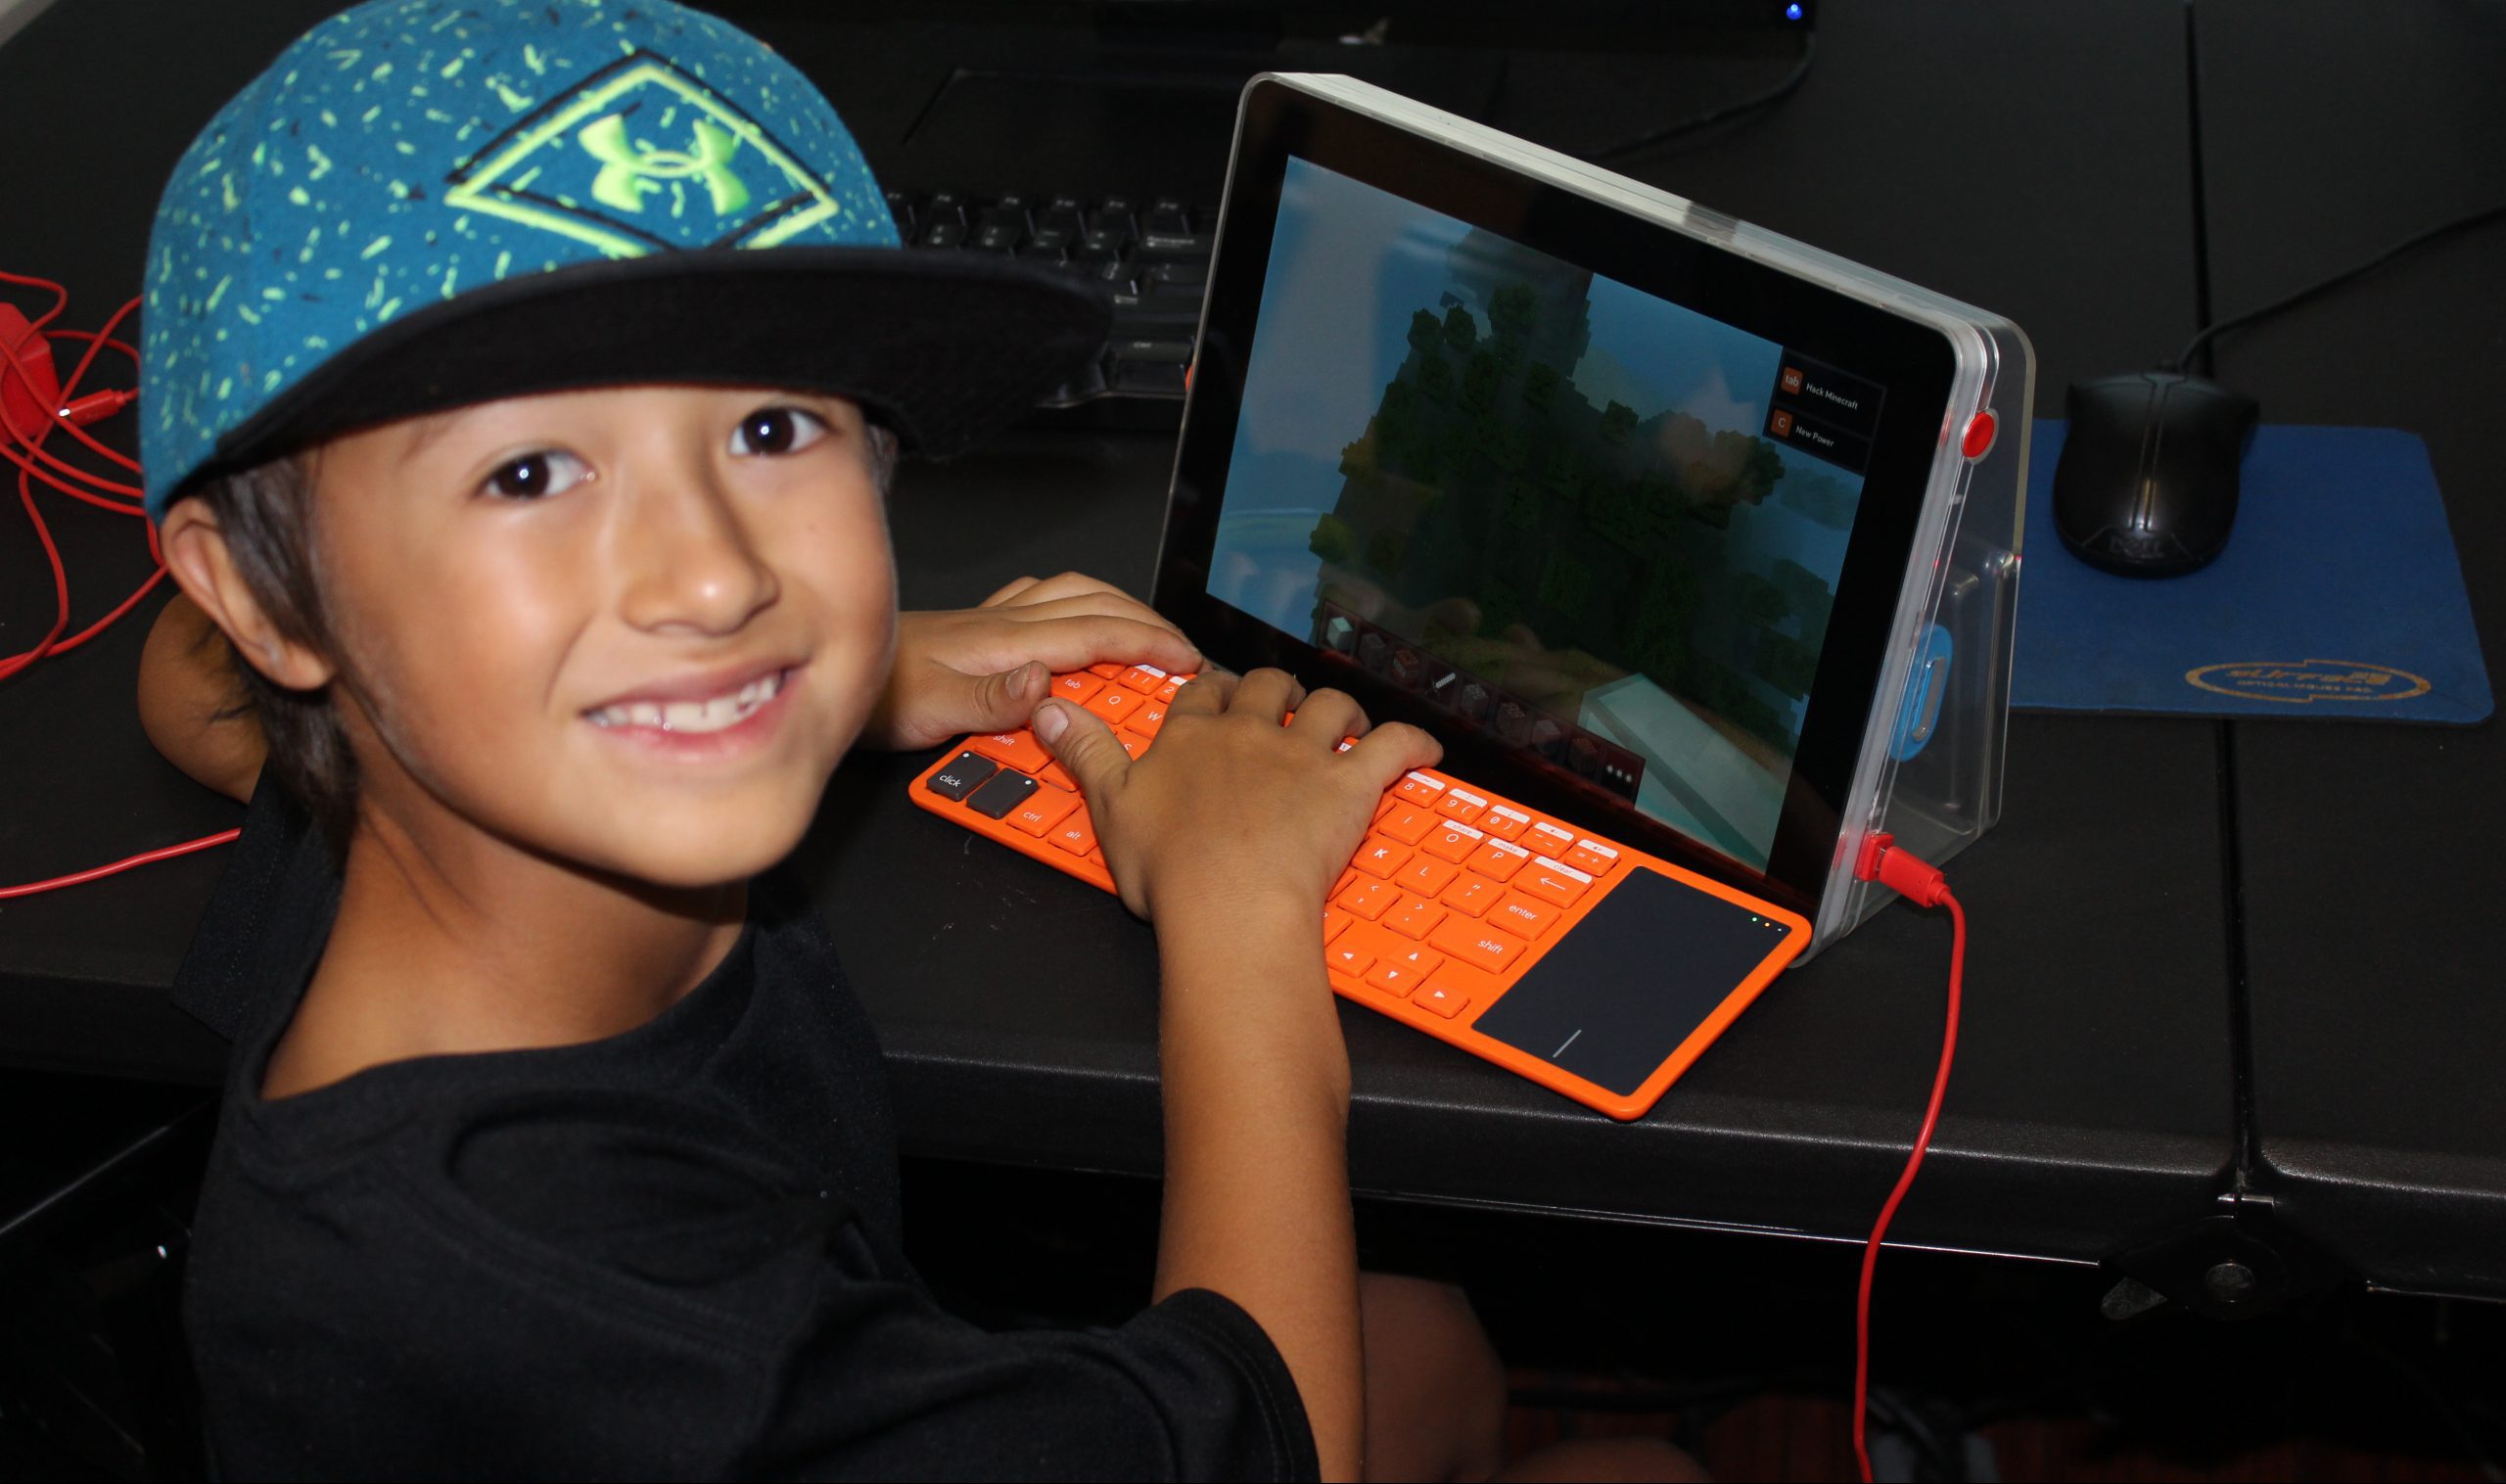 young boy playing a game on a ipad with keyboard